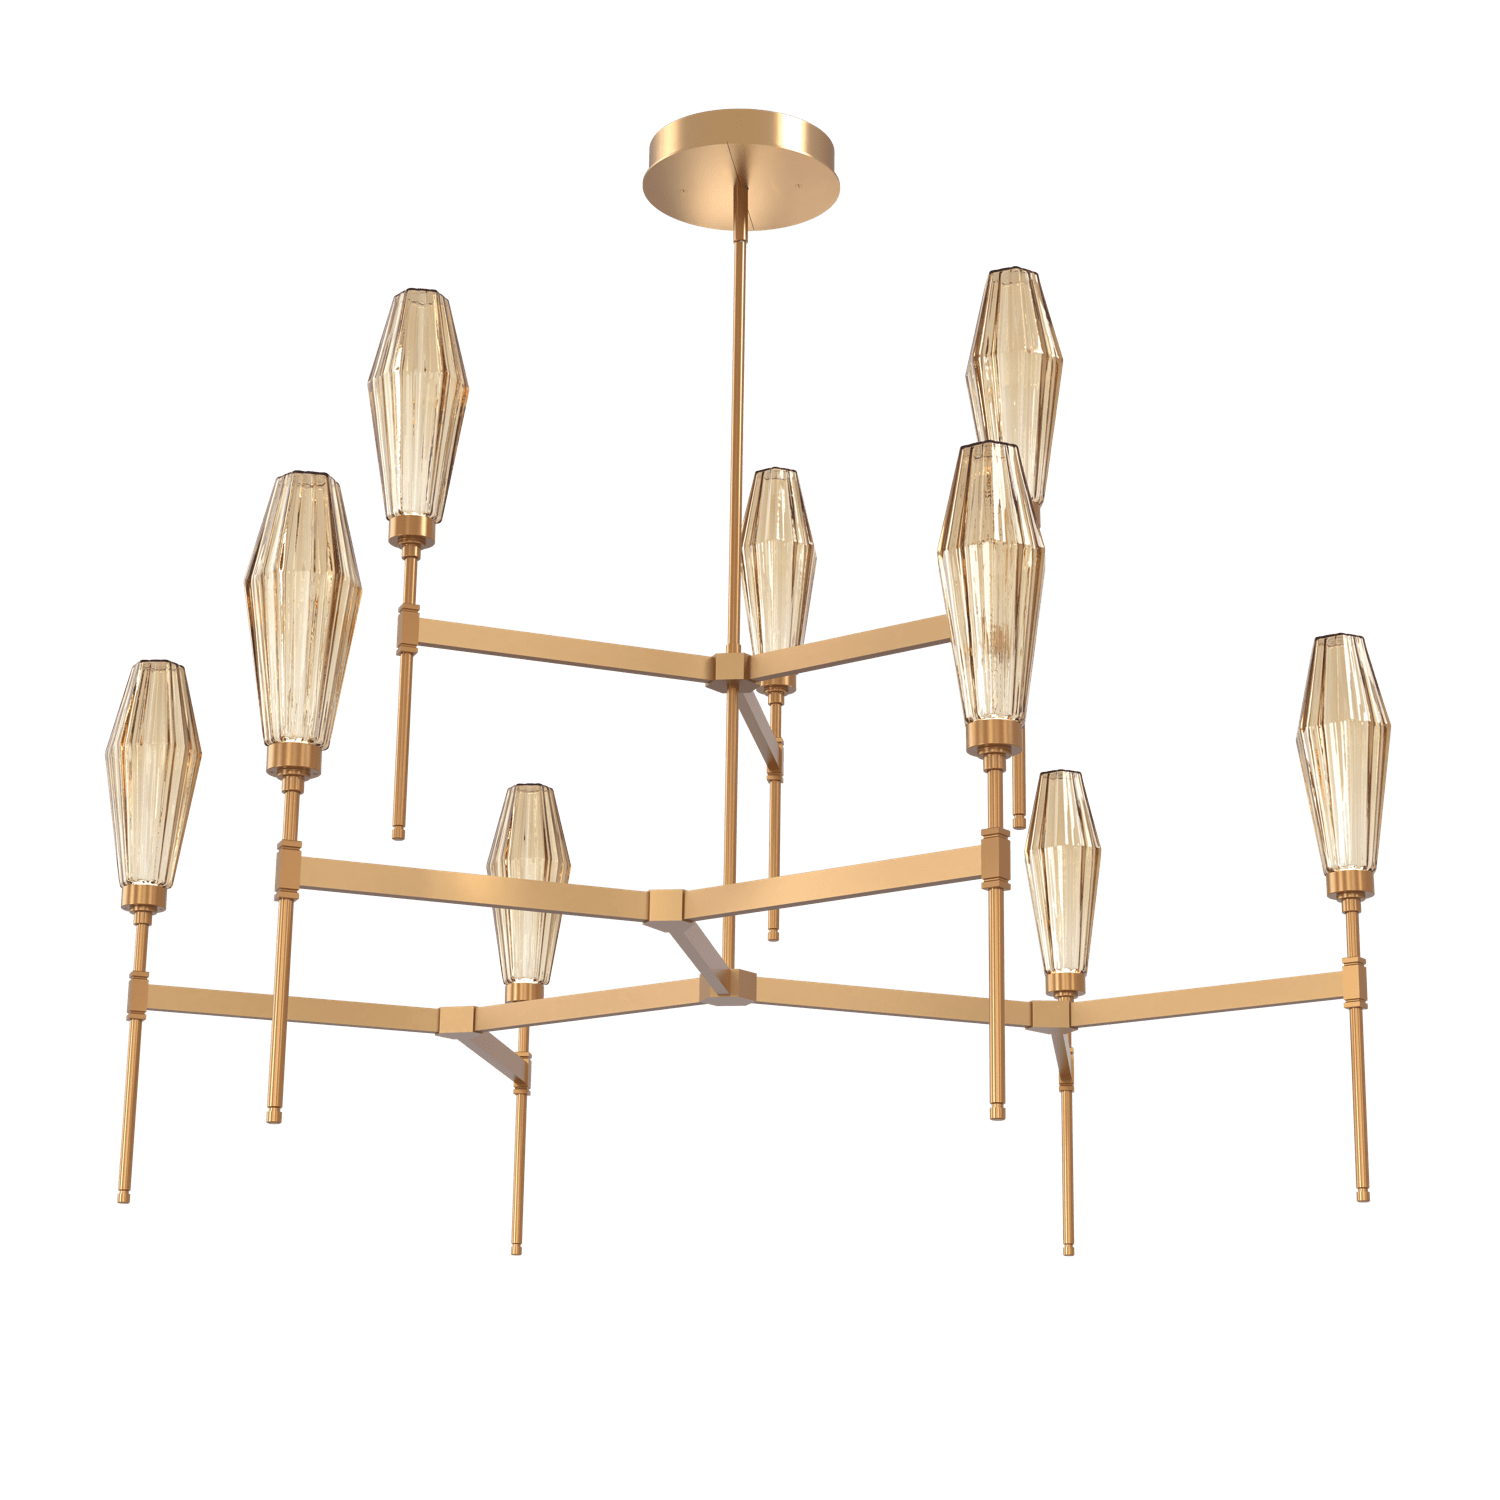 CHB0049-54-NB-RB-Hammerton-Studio-Aalto-54-inch-round-two-tier-belvedere-chandelier-with-novel-brass-finish-and-optic-ribbed-bronze-glass-shades-and-LED-lamping